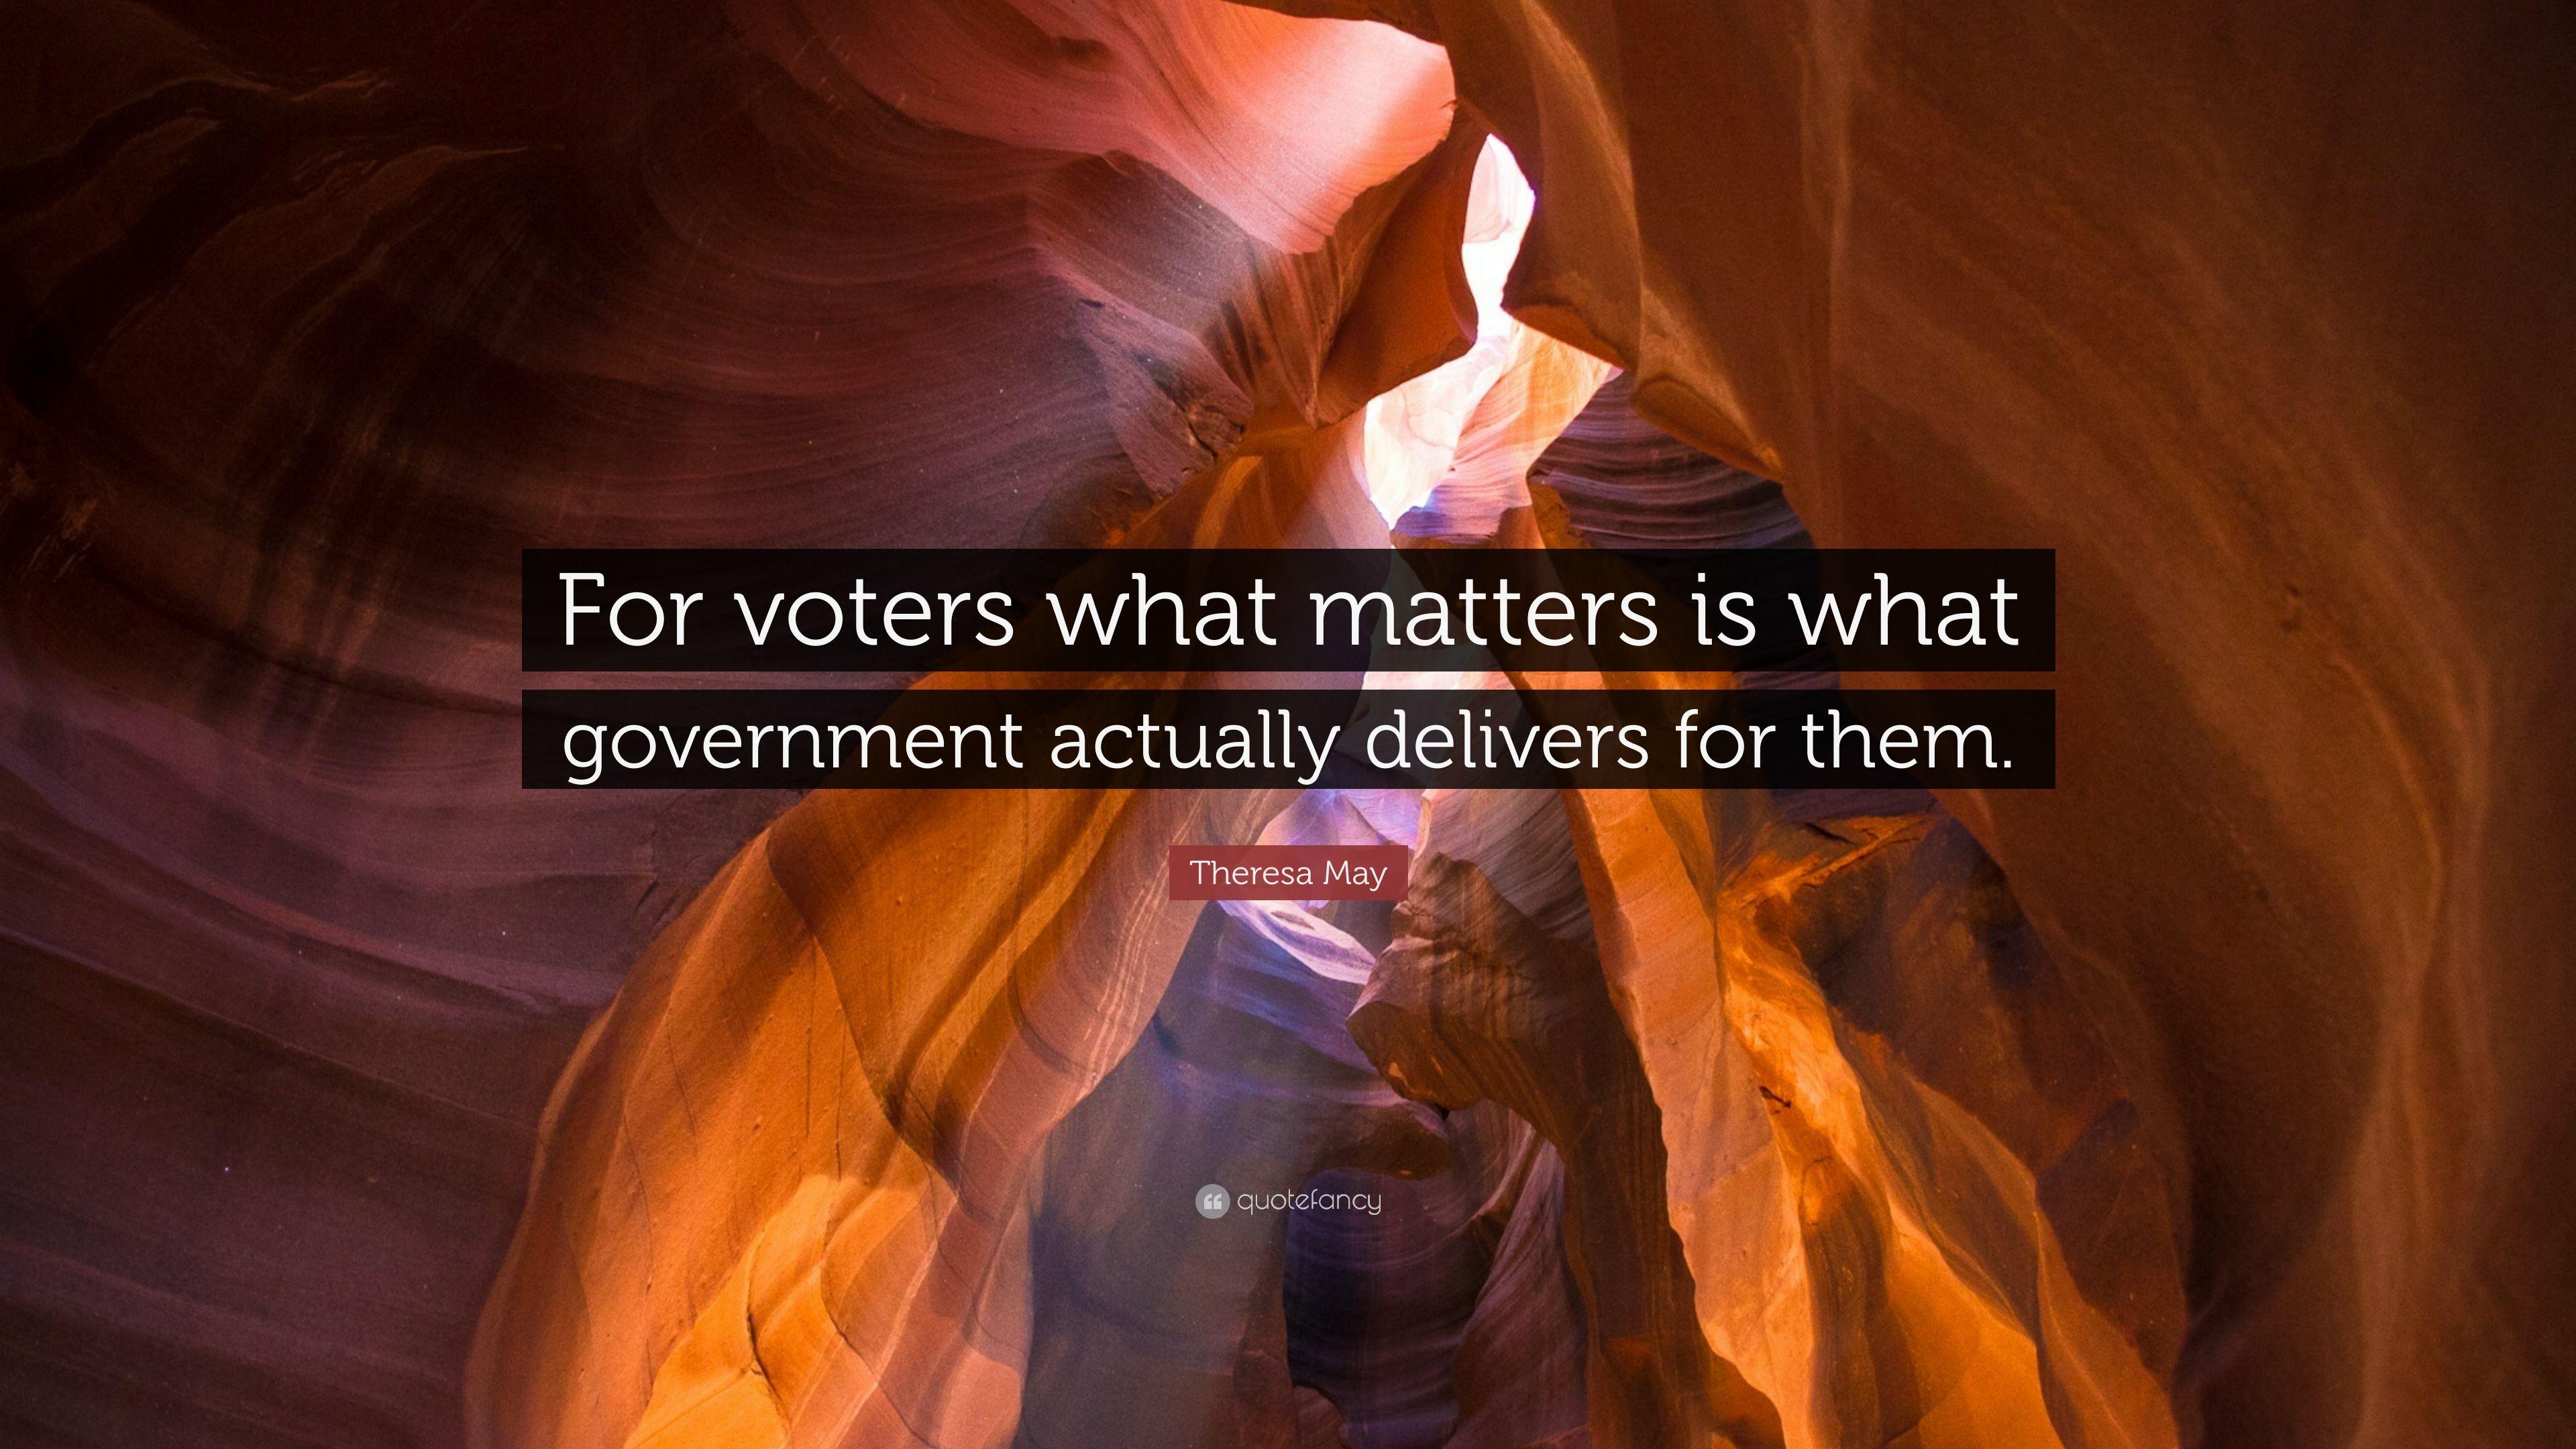 Theresa May Quote: “For voters what matters is what government